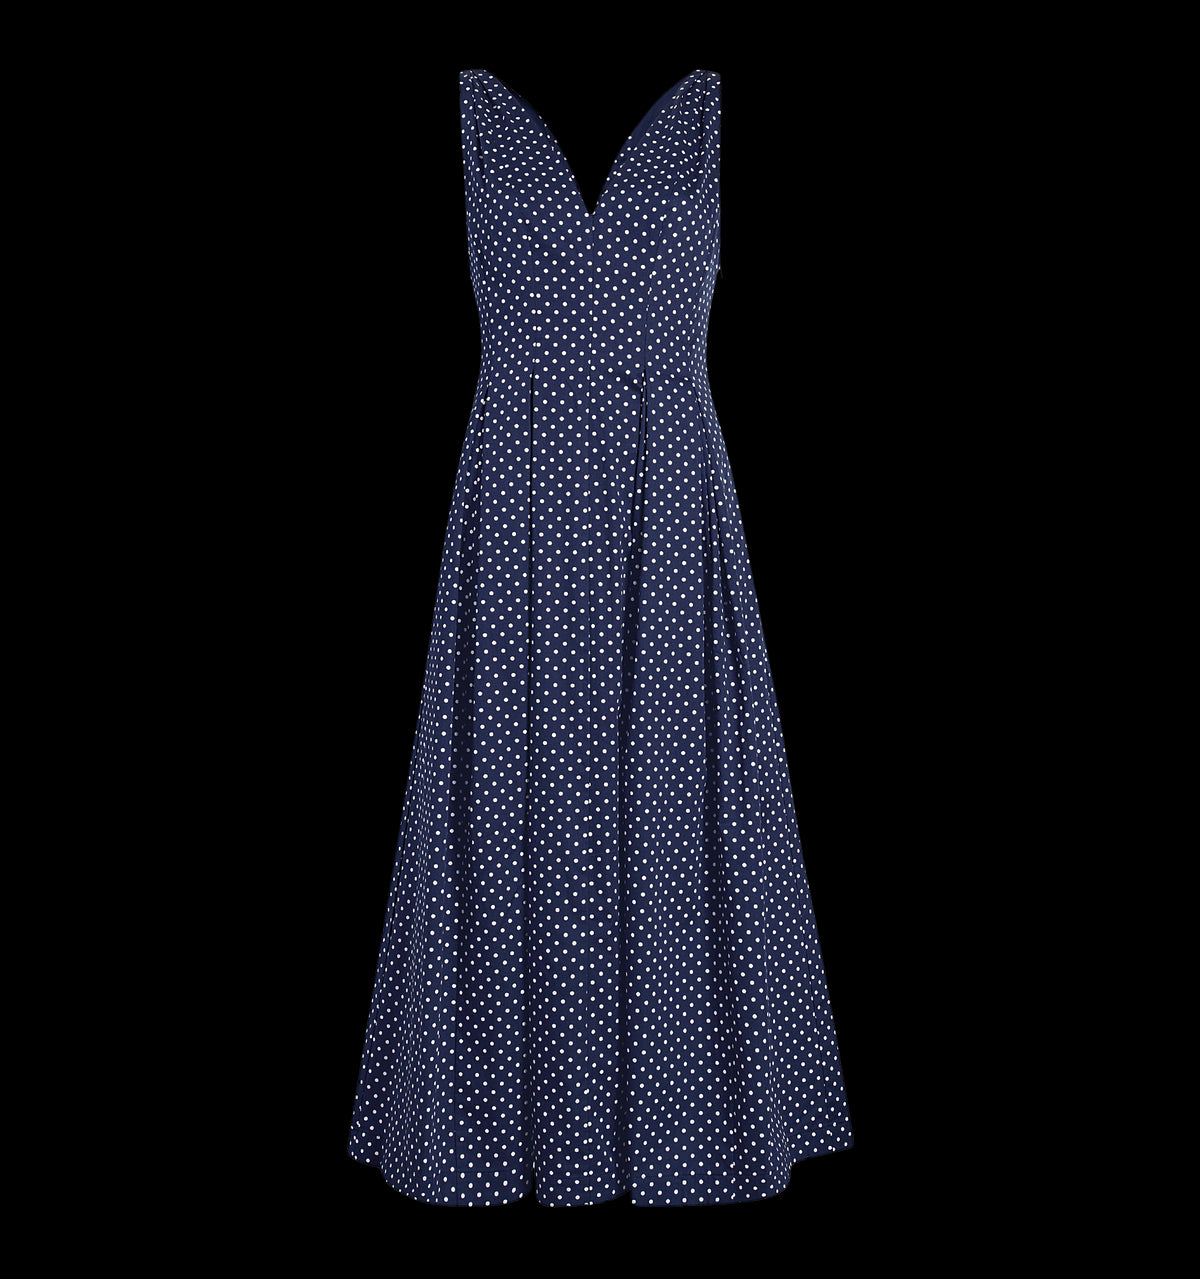 The Jacqueline Dress in Navy Polka Dot Cotton Sateen